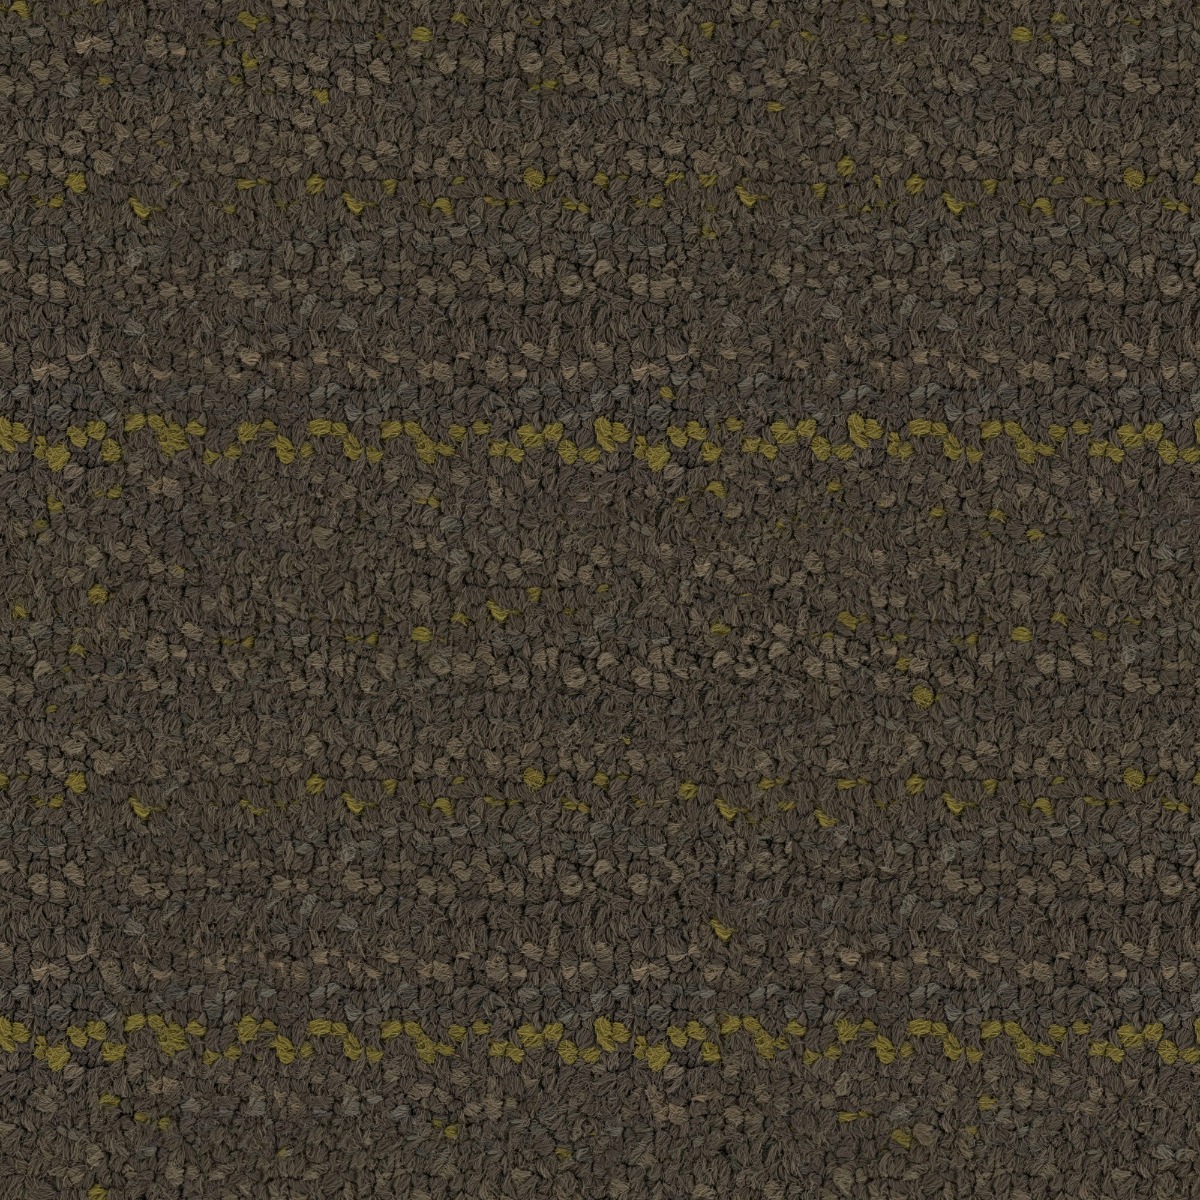 A seamless carpet texture with loop carpet units arranged in a None pattern